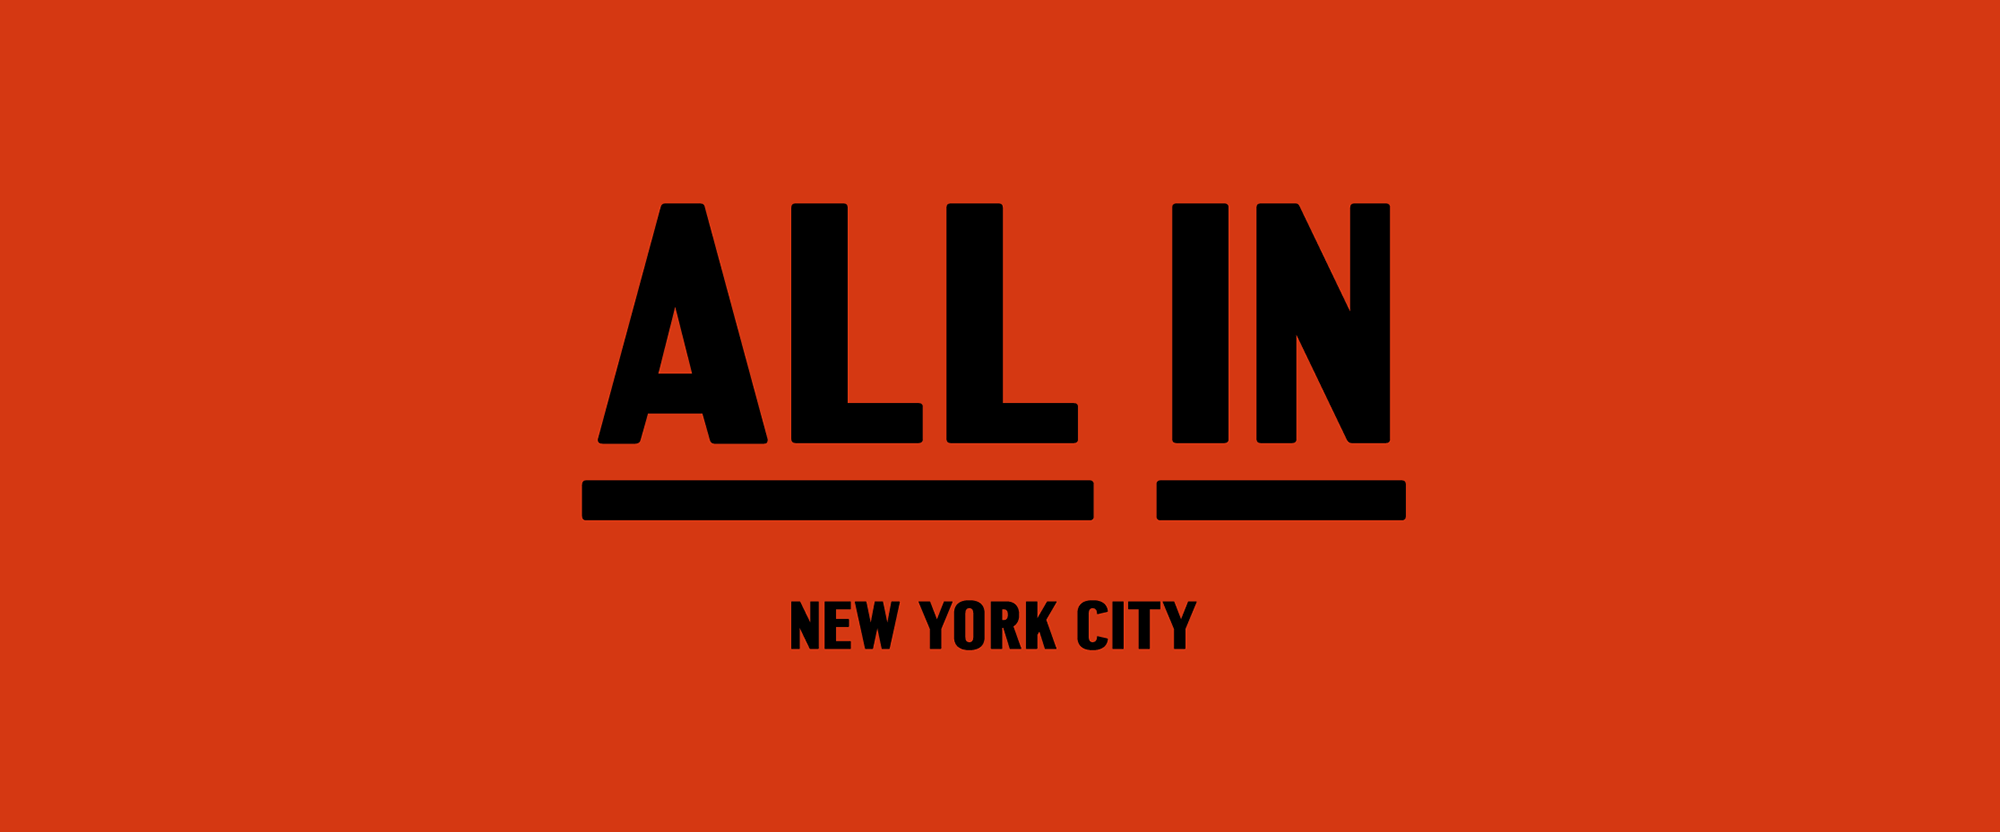 New Logo and Campaign for All in NYC by Aruliden